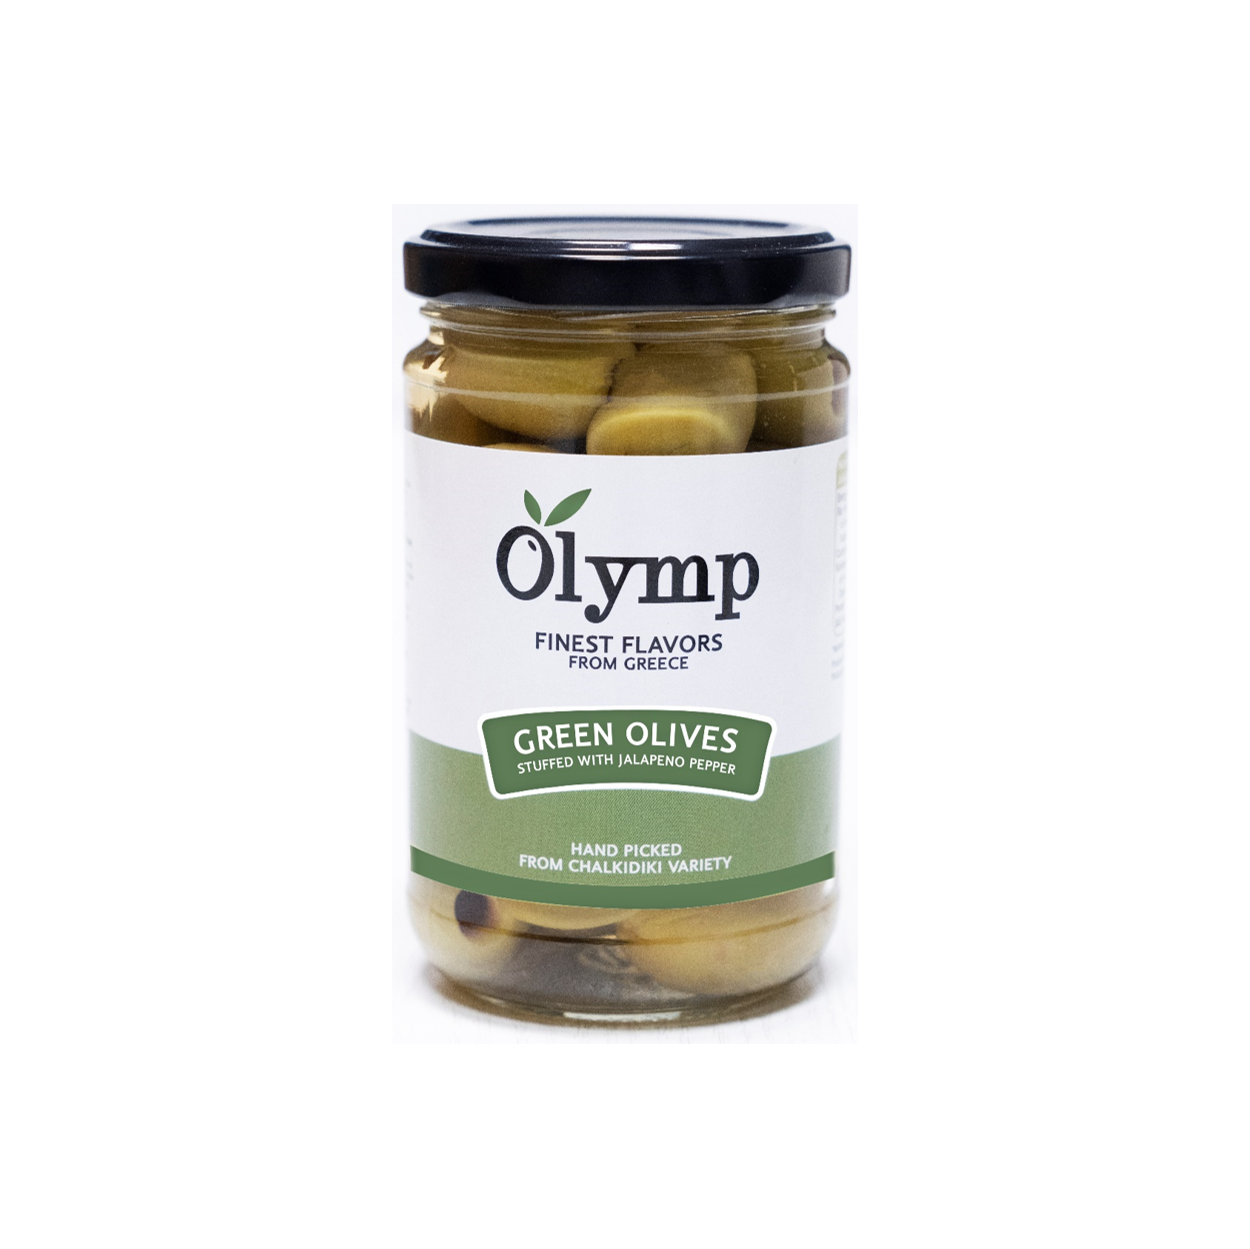 Olymp green olives stuffed with jalapeno